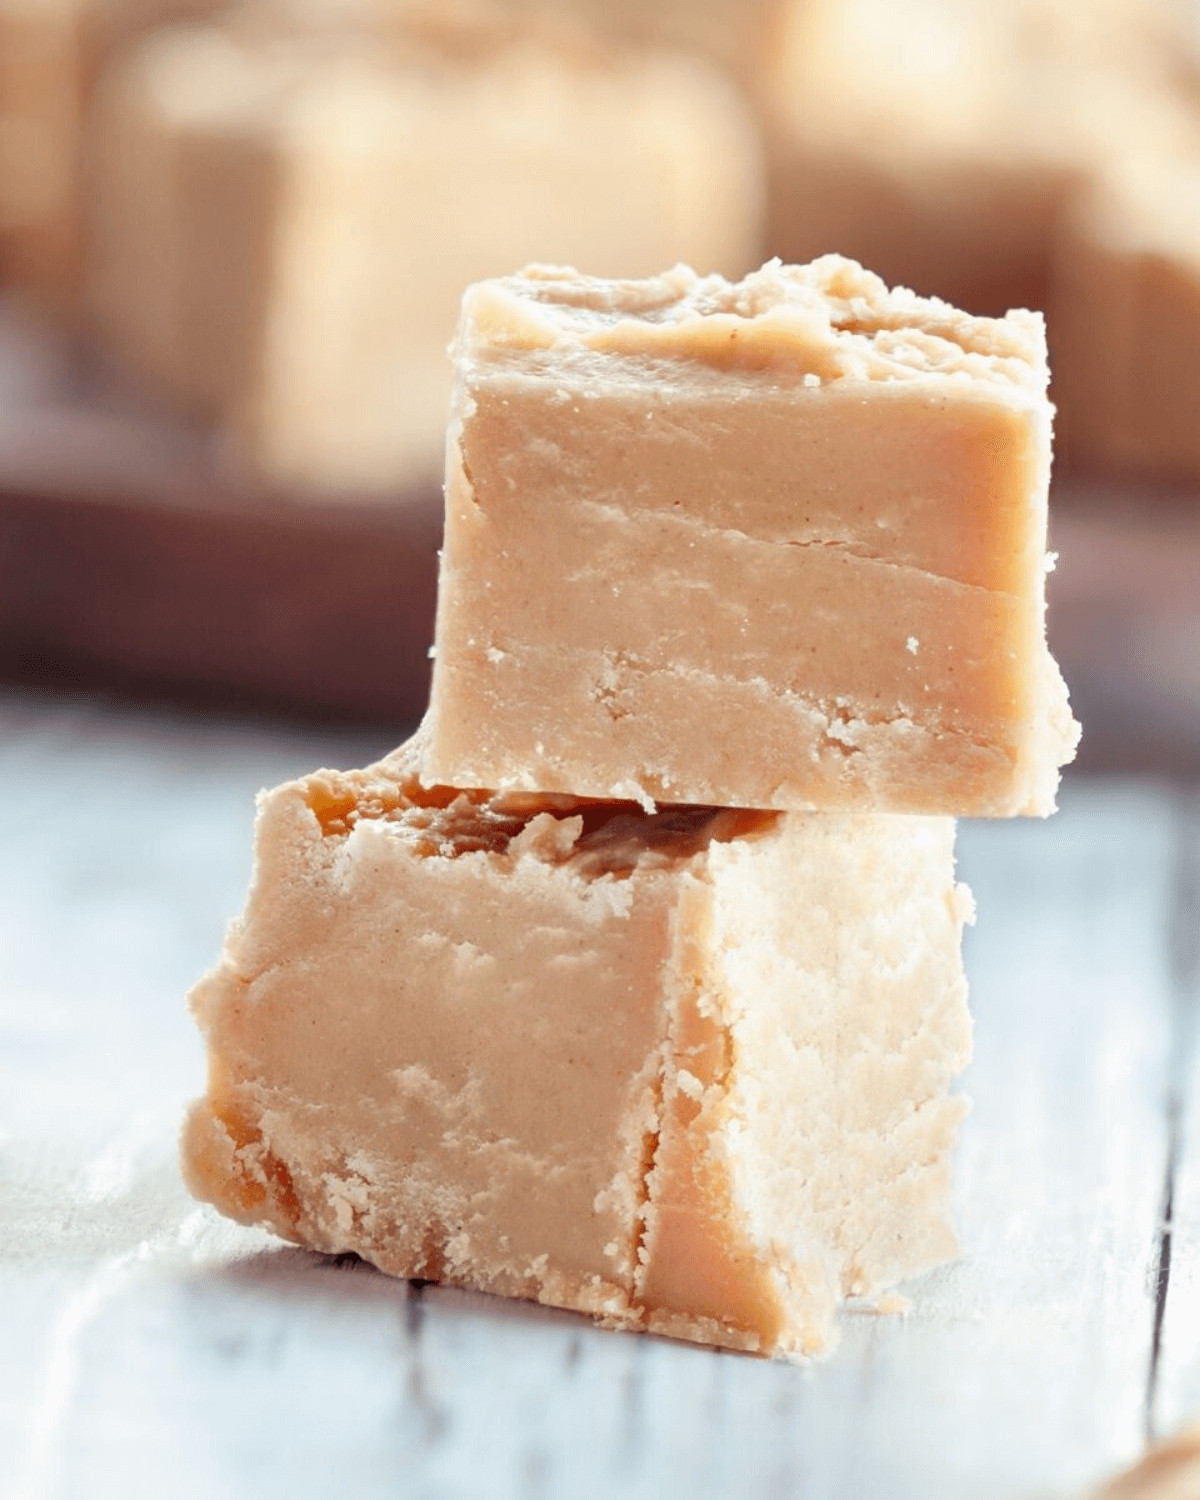 Two pieces of the easy peanut butter fudge.